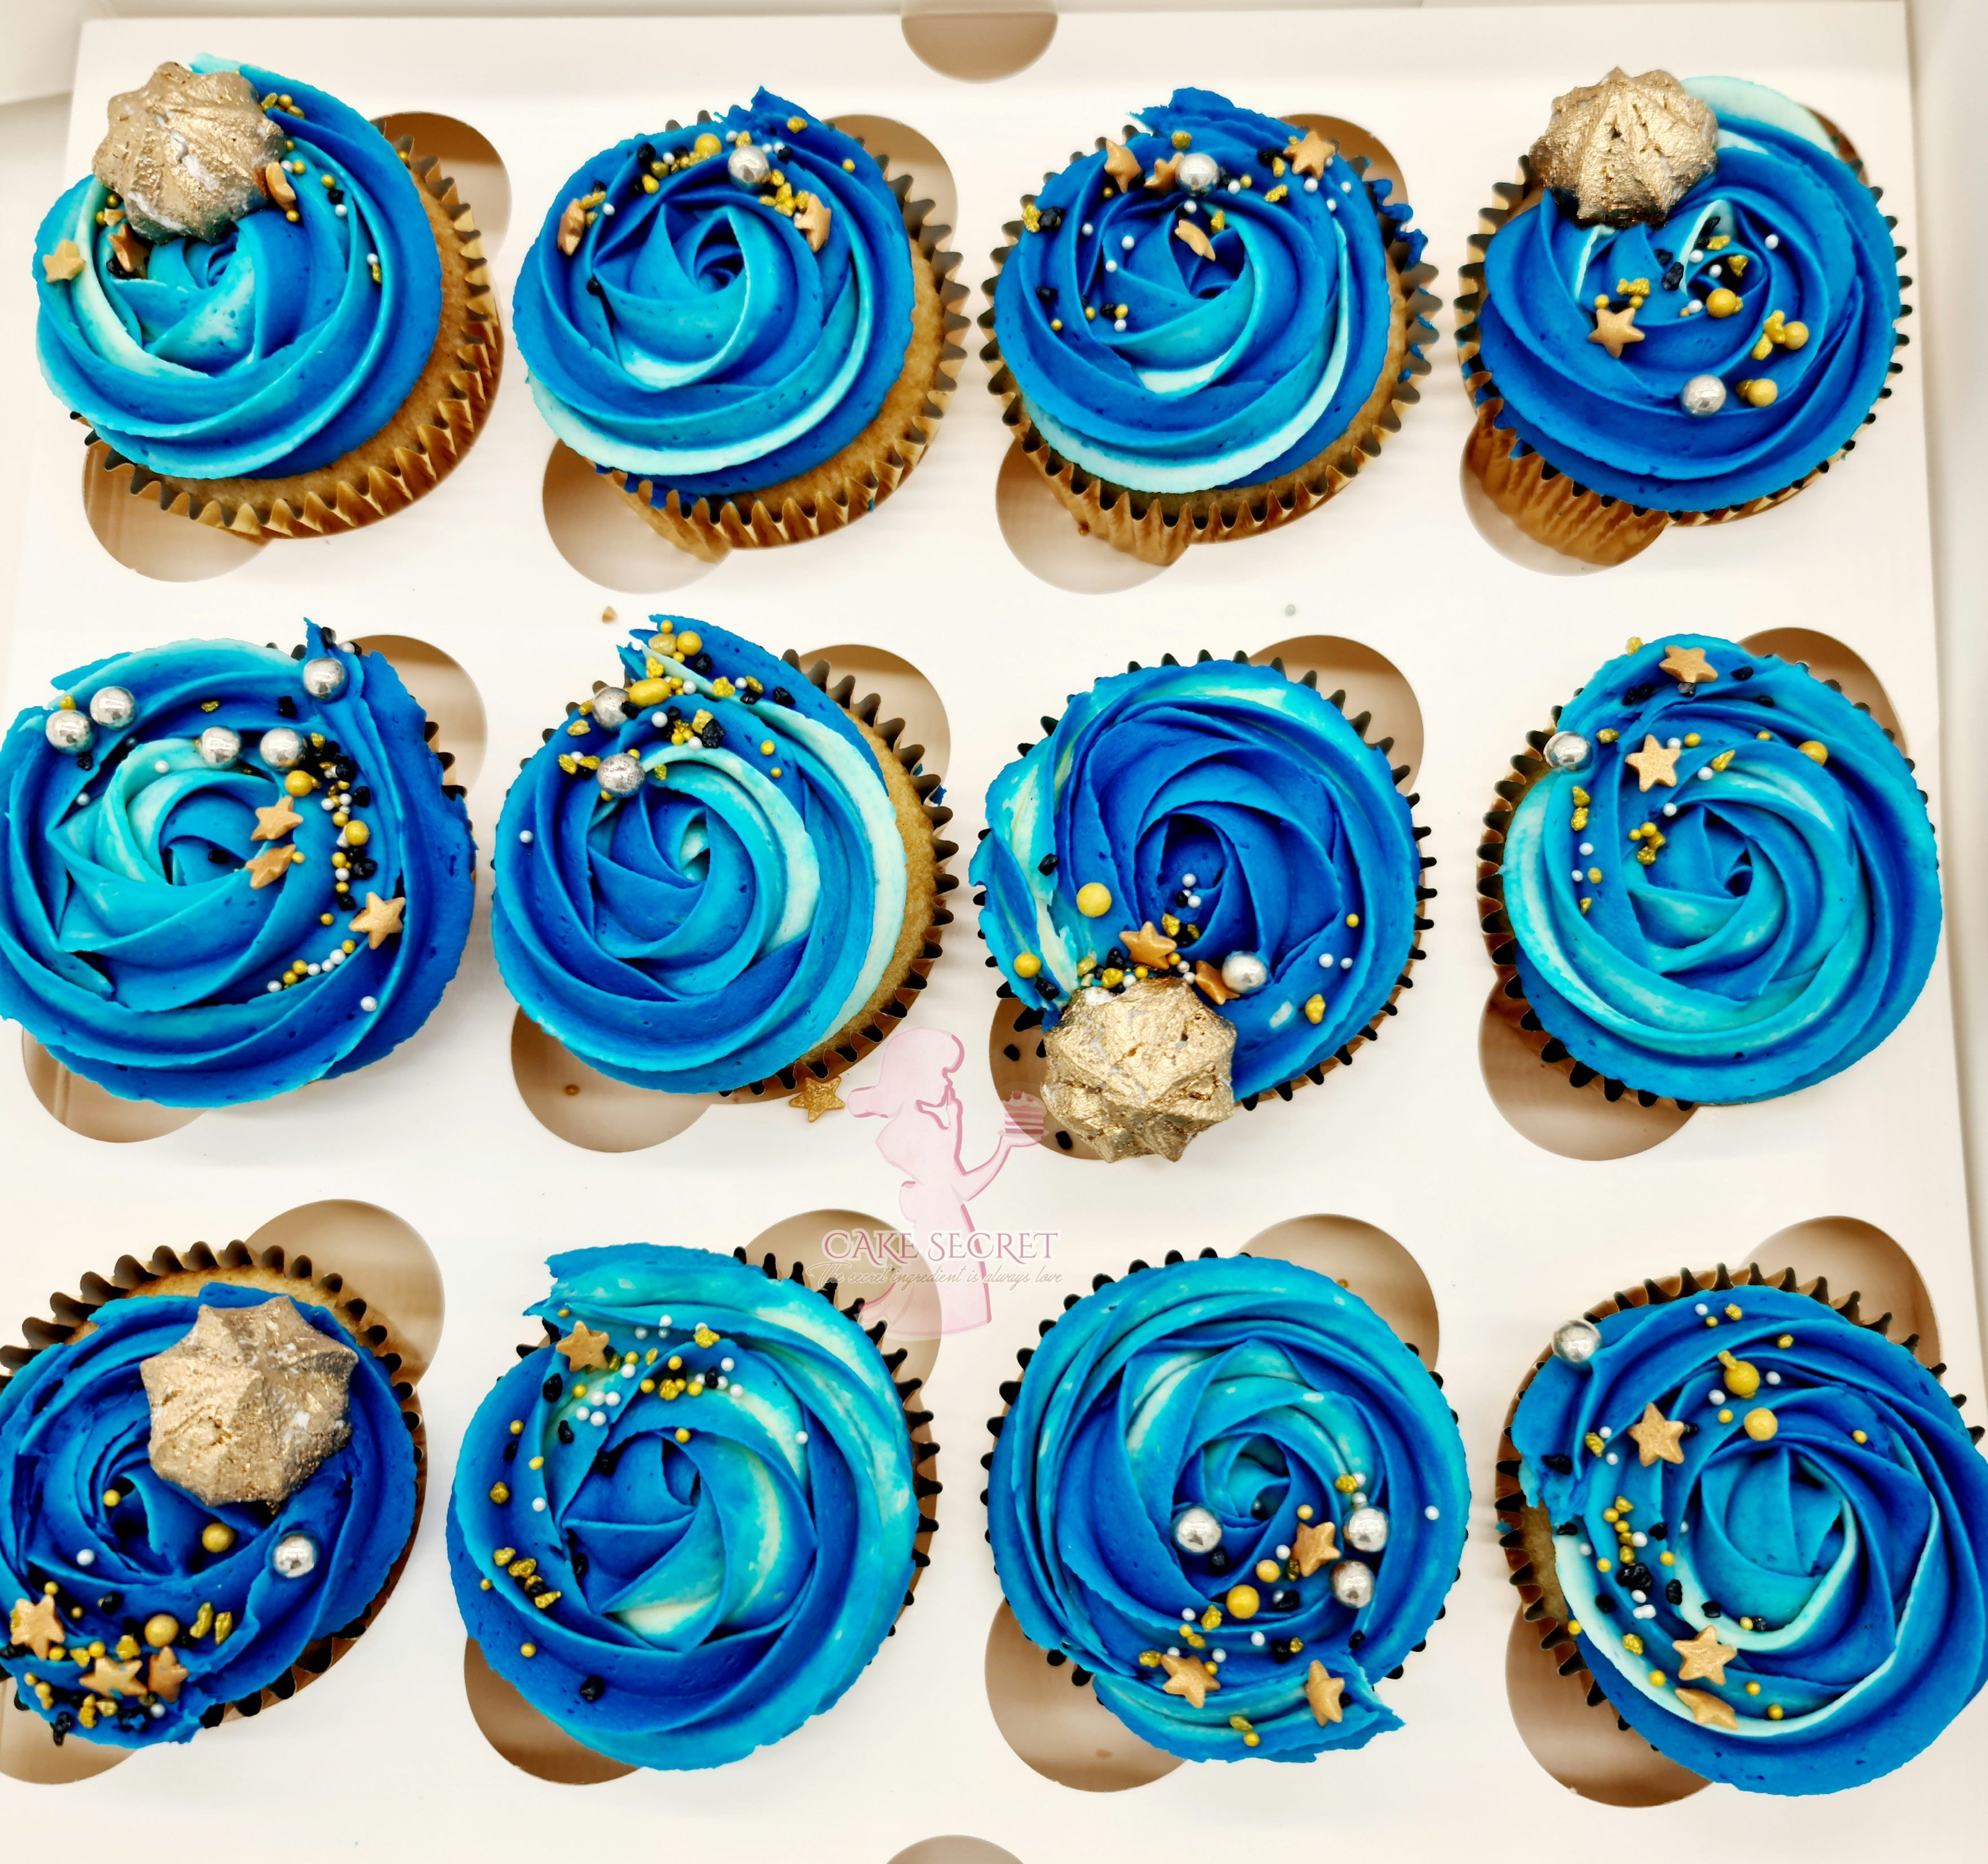 Gluten-free Cupcakes Adorned with Whimsical Buttercream Rosettes